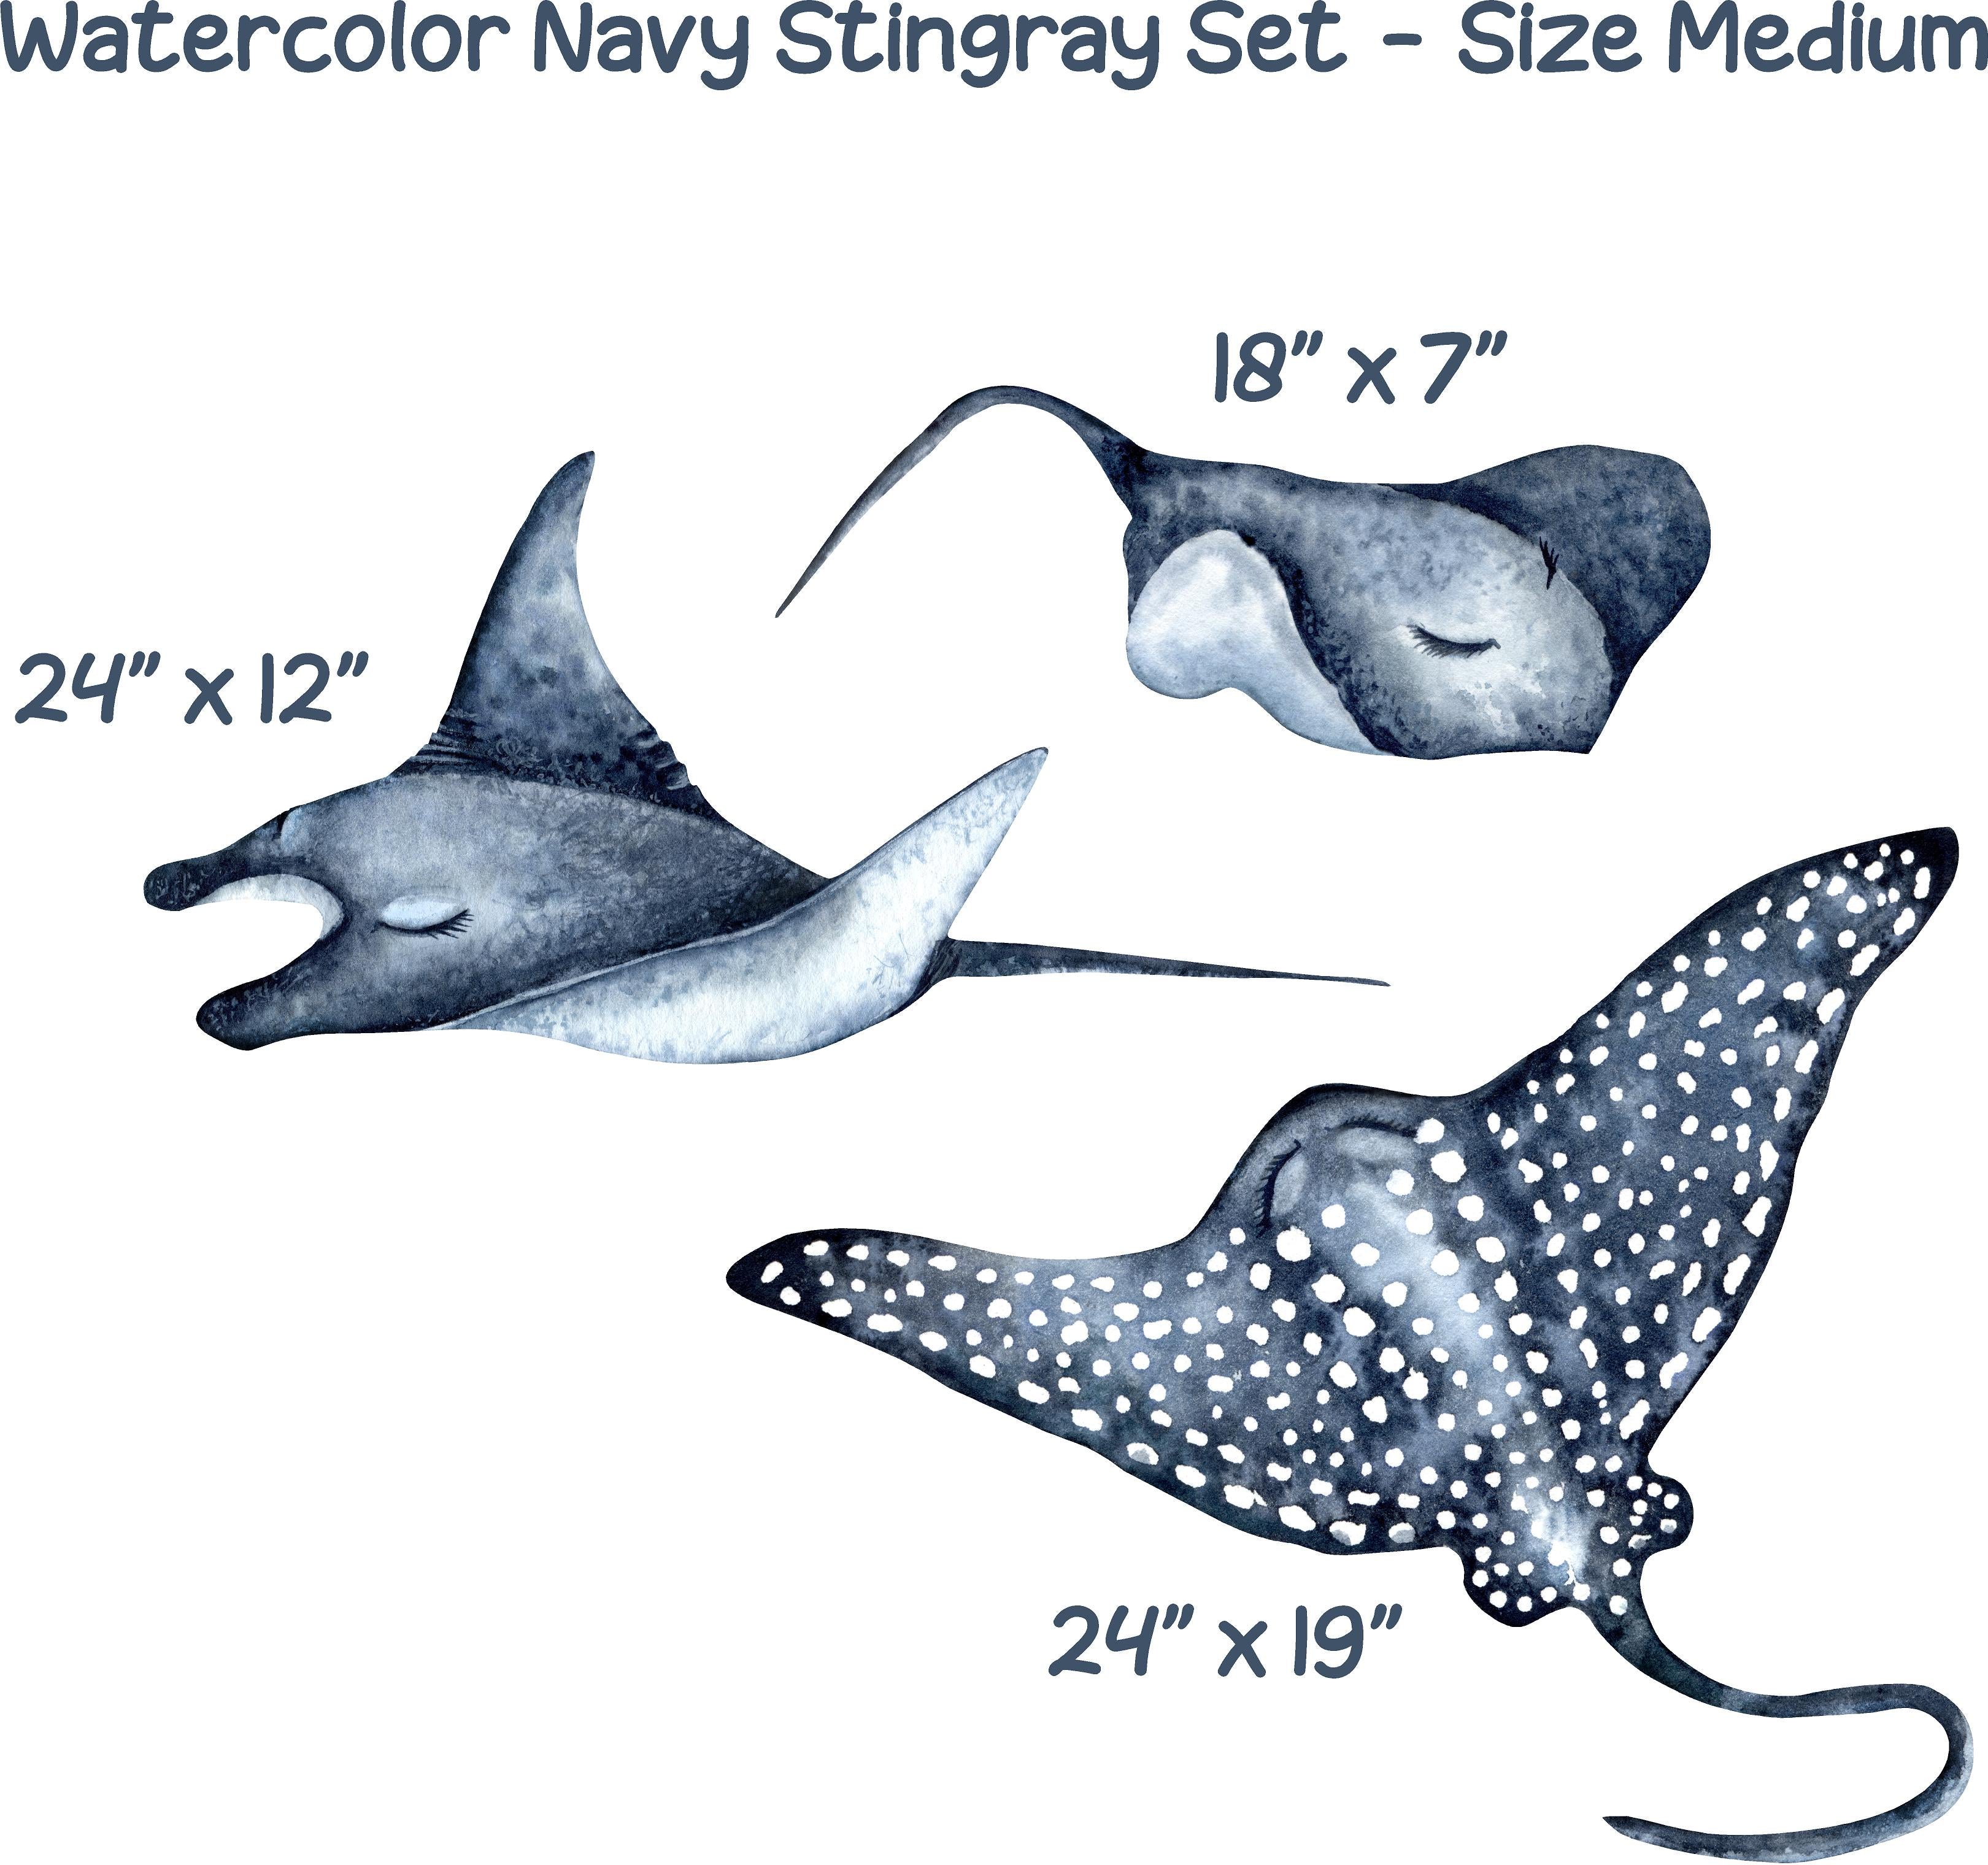 Stingray, Manta Ray & Spotted Eagle Ray Wall Decal Set of 3, Watercolor Navy Stingrays Wall Sticker Sea Ocean Fish | DecalBaby